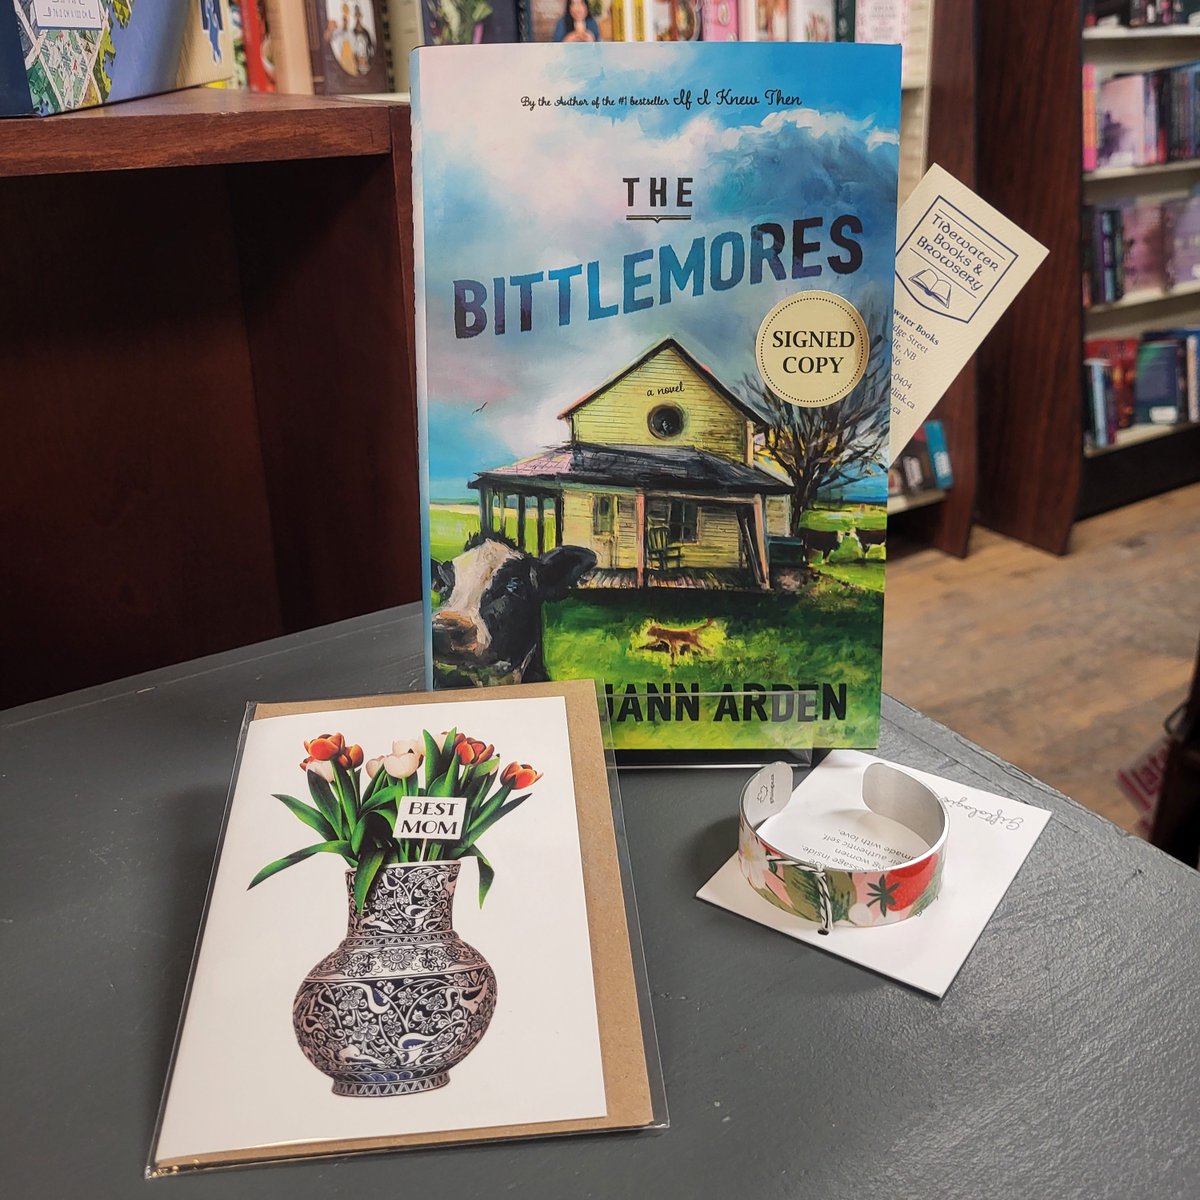 Mom would love a signed copy of The Bittlemores for #Mothersday! Add a card & #CanadianMade @giftologie  quote cuff bracelet, and you are set! 

Visit us in person or online at tidewaterbooks.ca! 💕🇨🇦📚

#IReadCanadian #ShopSmall #ShopLocal #ShopNB #ShopIndie #ThinkIndie